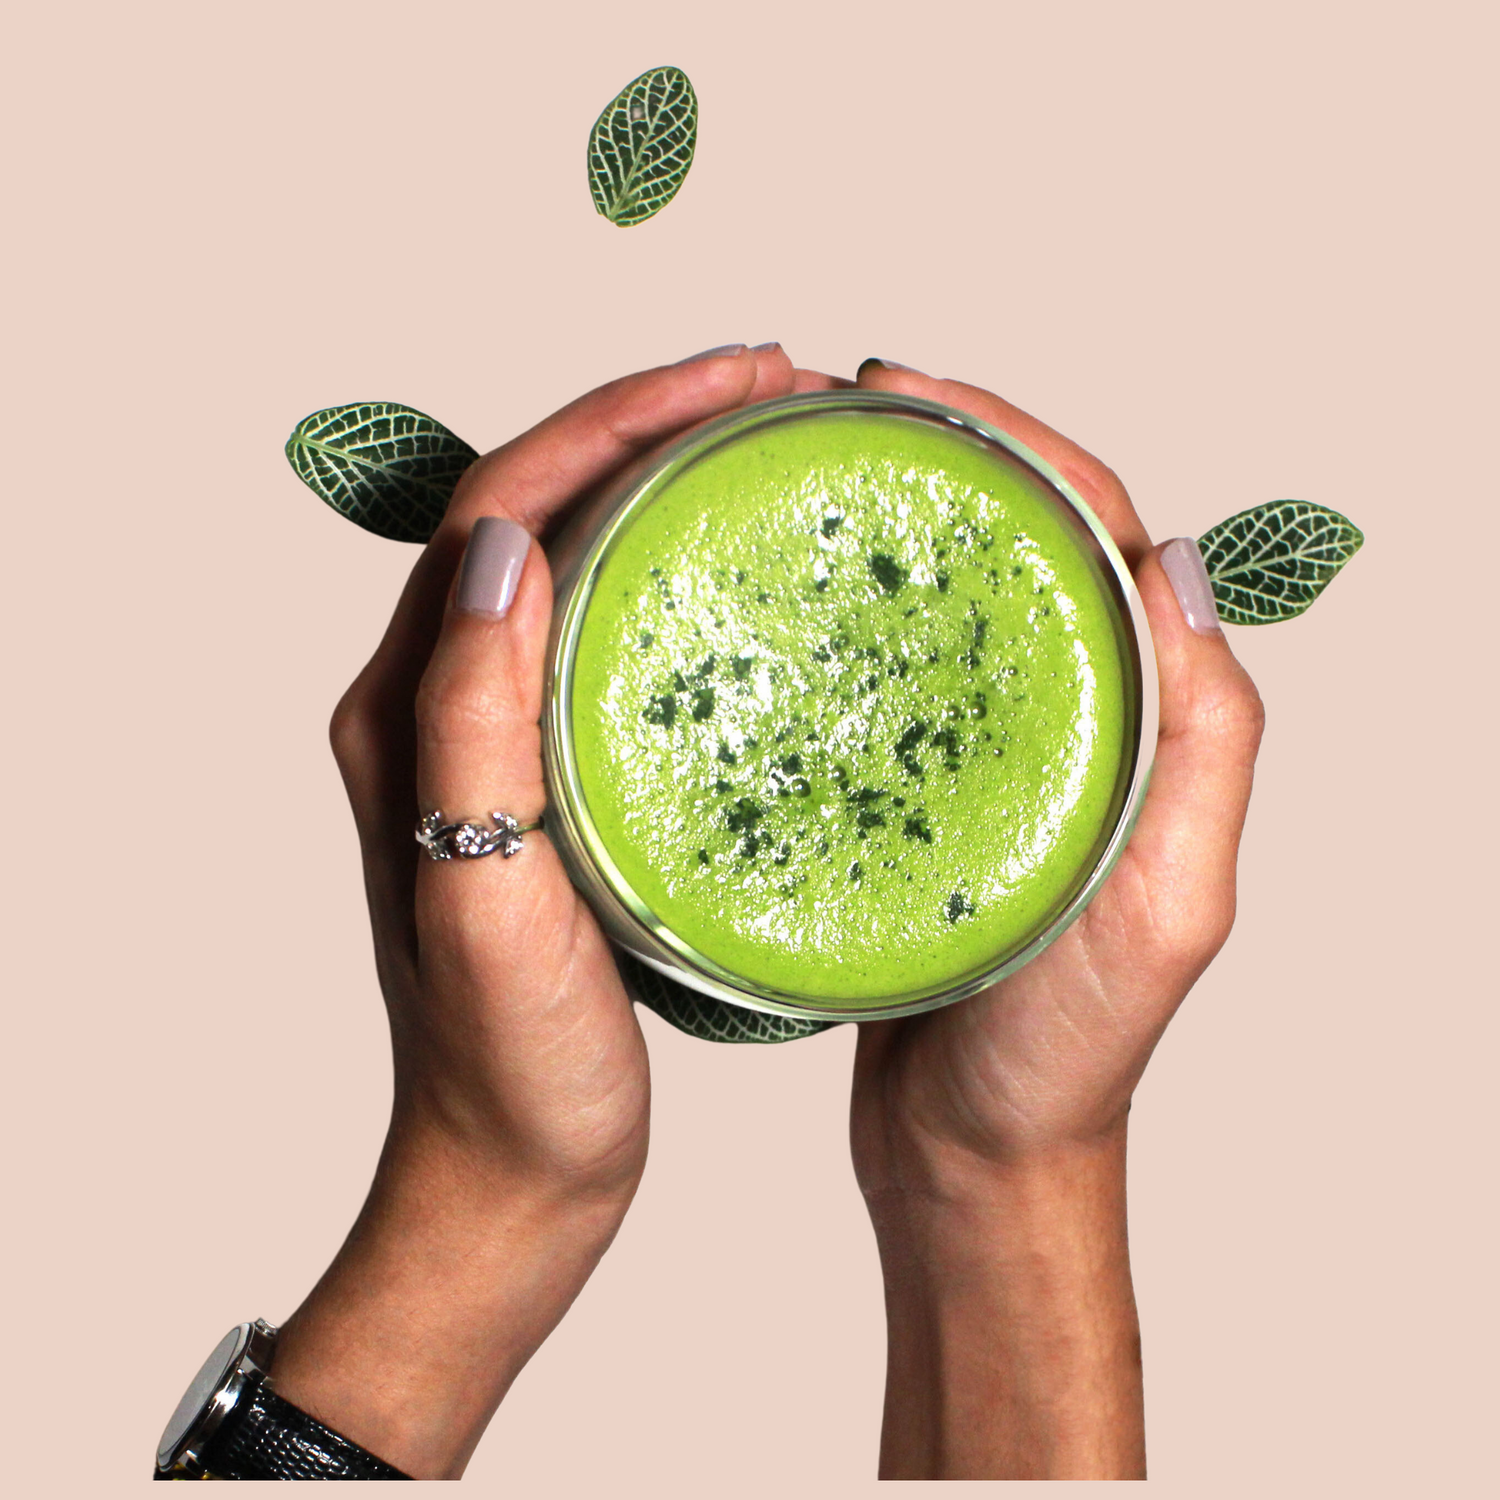 Two hands holding a matcha latte made with Greenboxed matcha green tea powder. The hands have a ring and a watch. Also, it displays few leaves around the glass. The color of matcha latte is quality vibrant green. Greenboxed matcha also offers wholesale / bulk matcha green tea powder.  